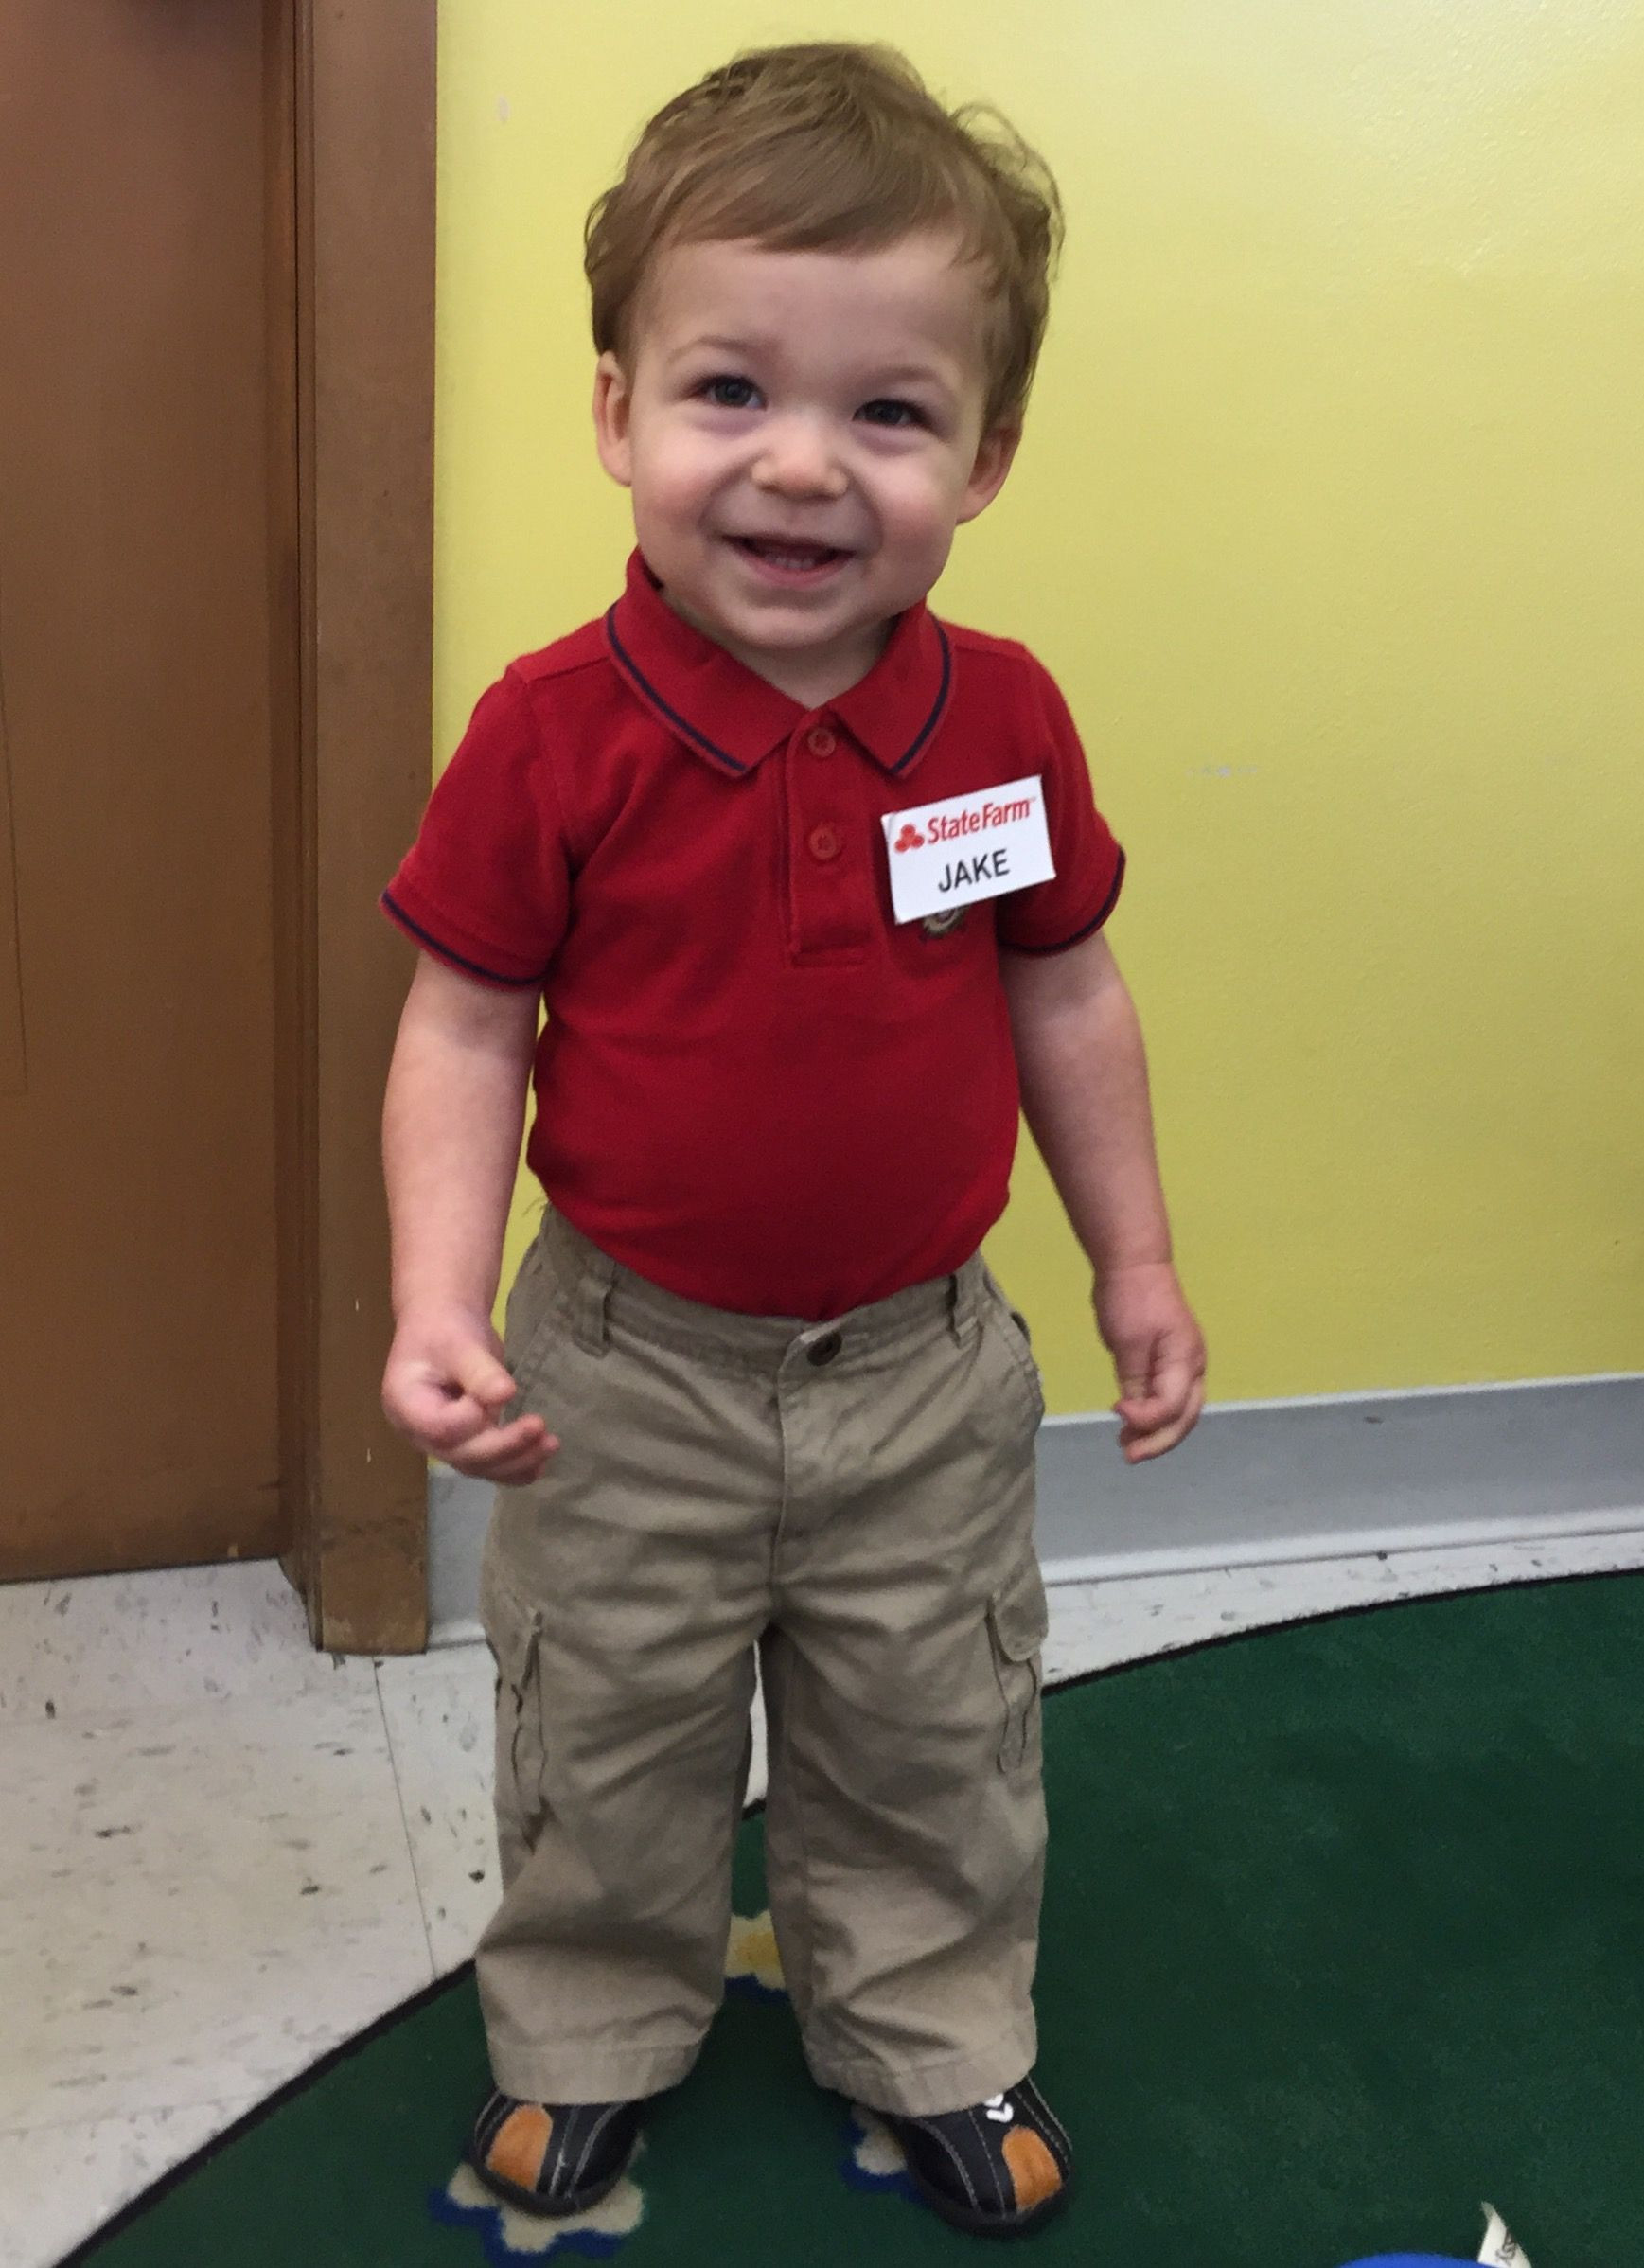 DIY Halloween Costume Toddler
 Jake from State Farm toddler boy DIY Halloween Costume